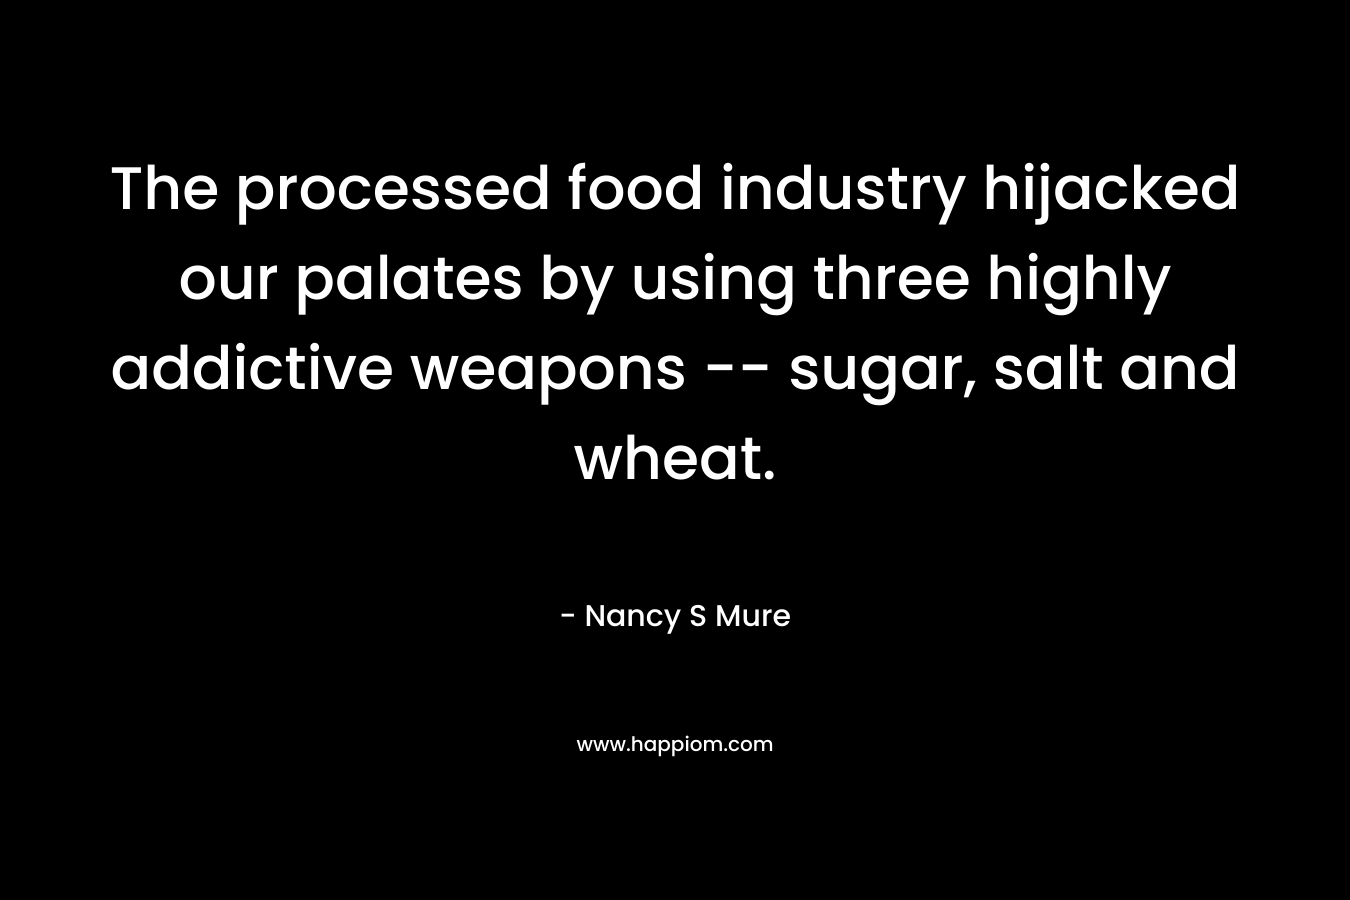 The processed food industry hijacked our palates by using three highly addictive weapons — sugar, salt and wheat. – Nancy S Mure